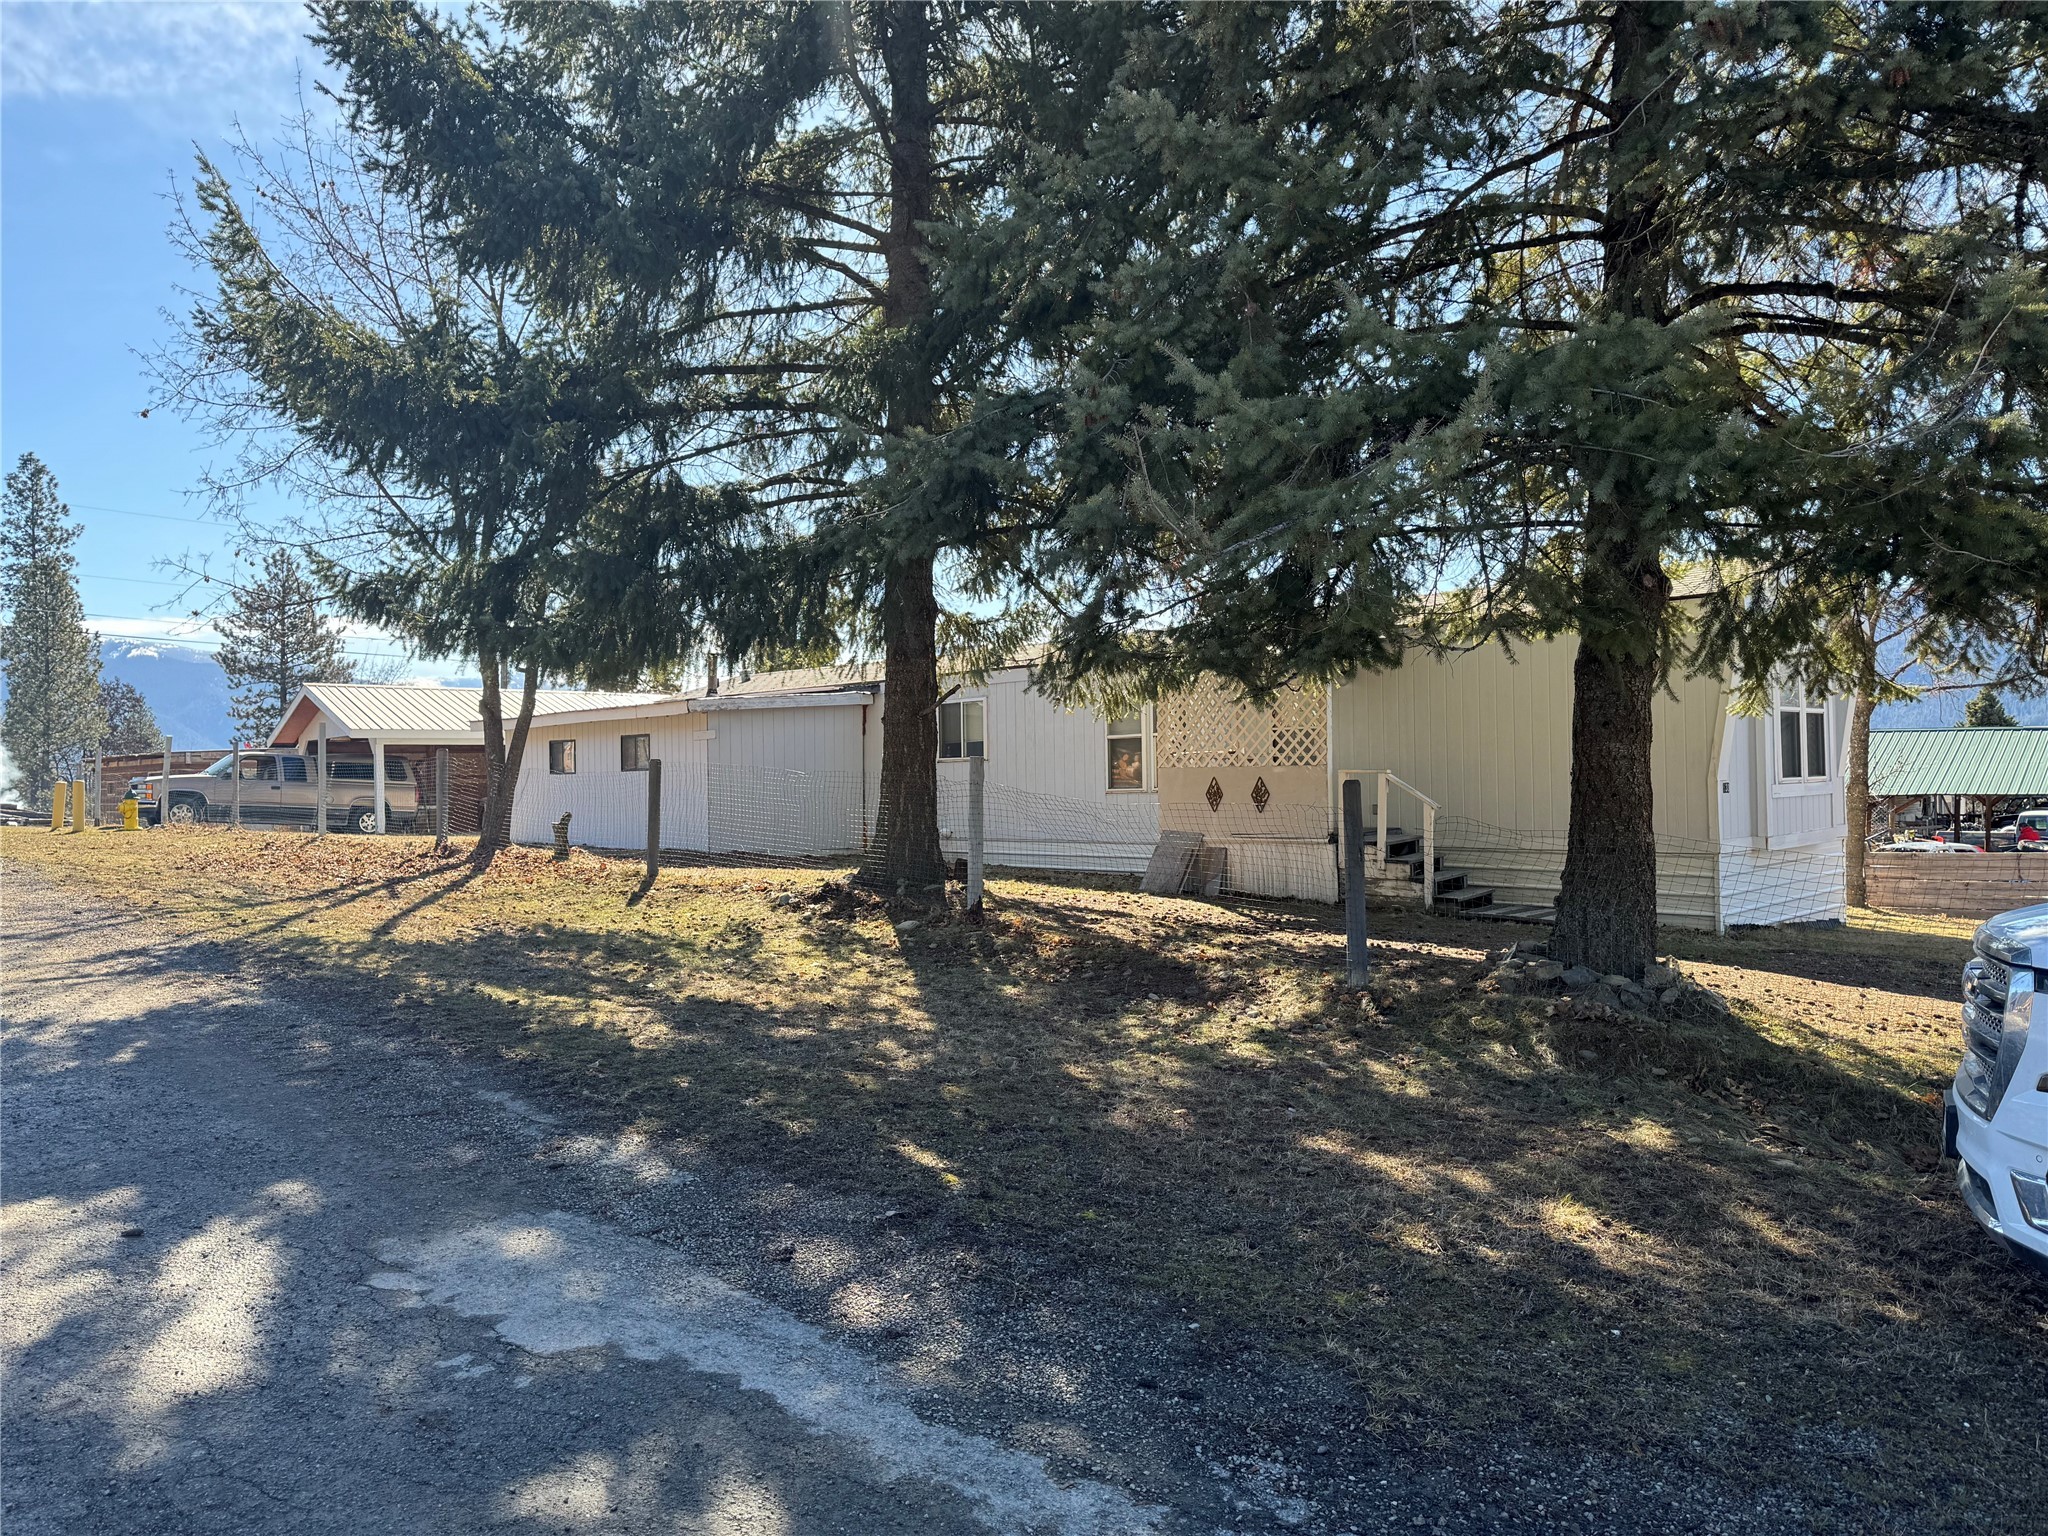 Lovely 2 bedroom/2 bath manufactured home with a bonus room/addition. Bonus room is accessed through the spacious master bedroom. Great garage with power and concrete floor, also an additional carport all located at the top of Grove Street. City water and sewer.